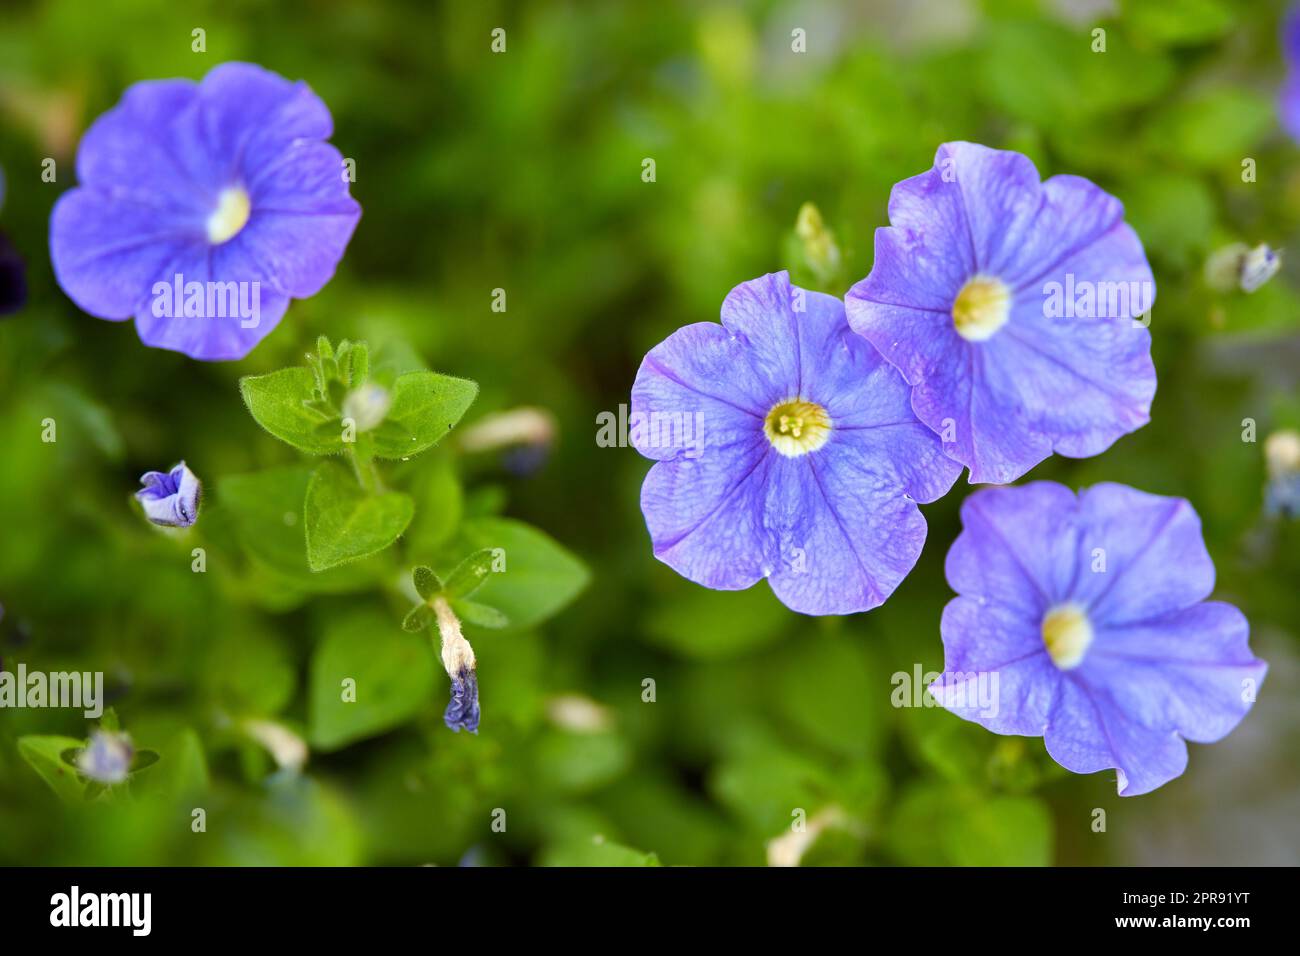 Dinetus duclouxii, blooming flowers and buds on vines in a garden. Closeup of a purple carnations growing between green leaves in nature. Closeup of flowerheads blossoming on floral plant outdoors Stock Photo